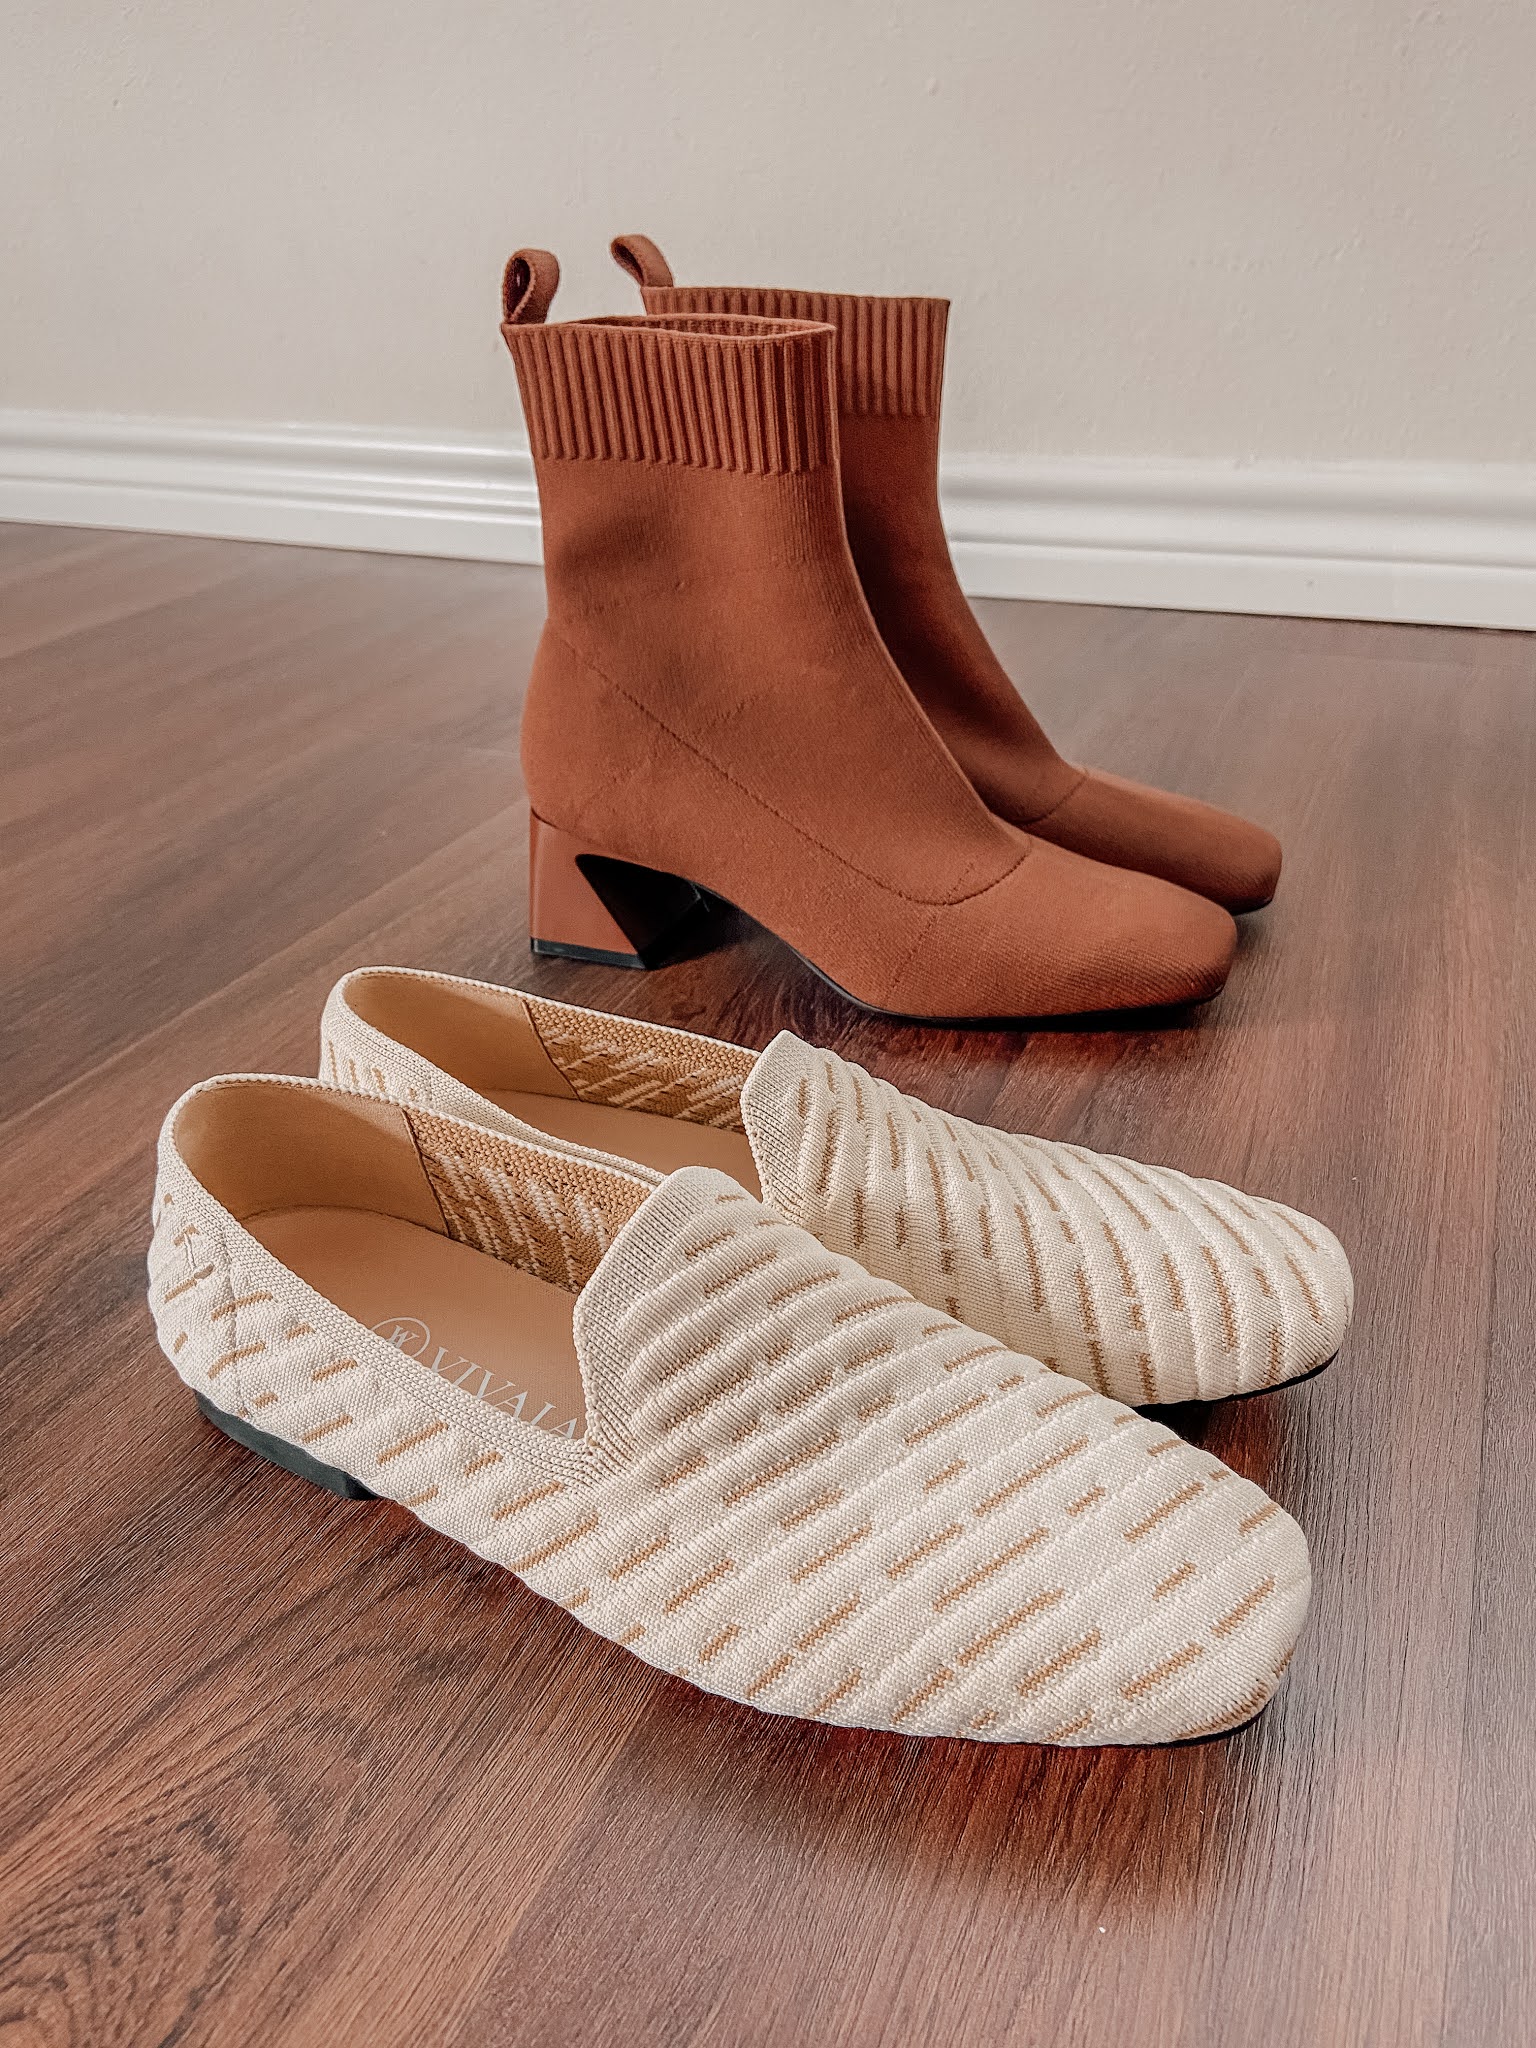 Sustainable Footwear | Your Girl Jess | Lifestyle Blog